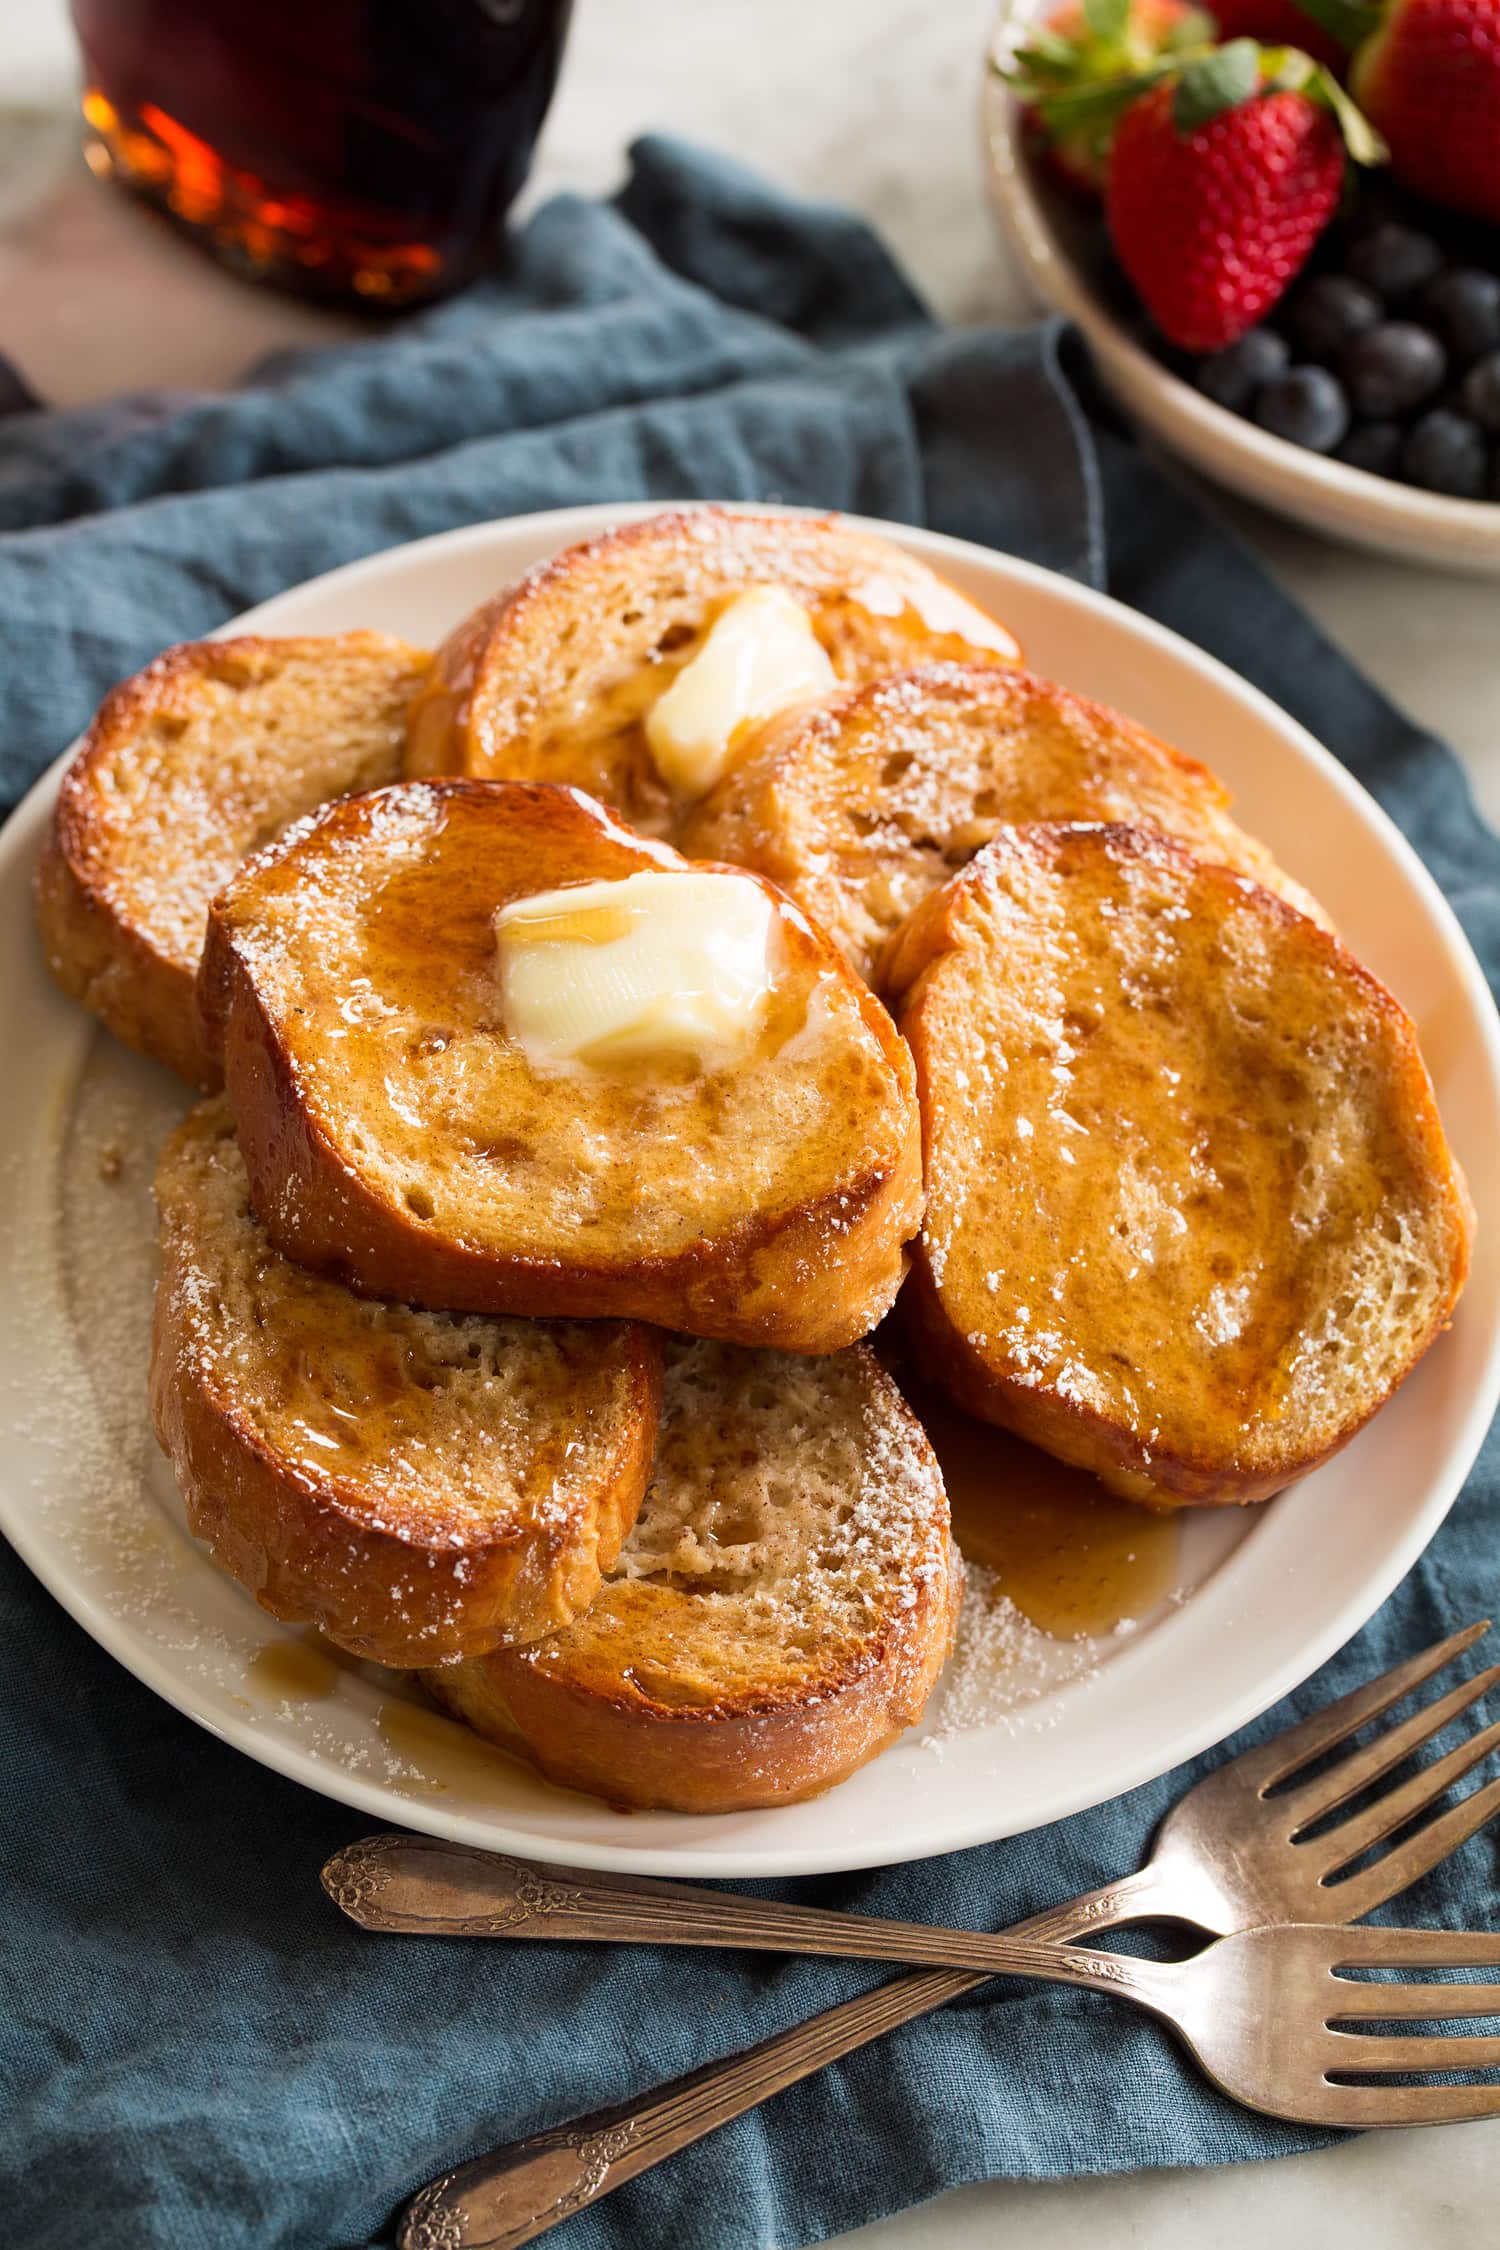 Baked french toast cut into individual slices.